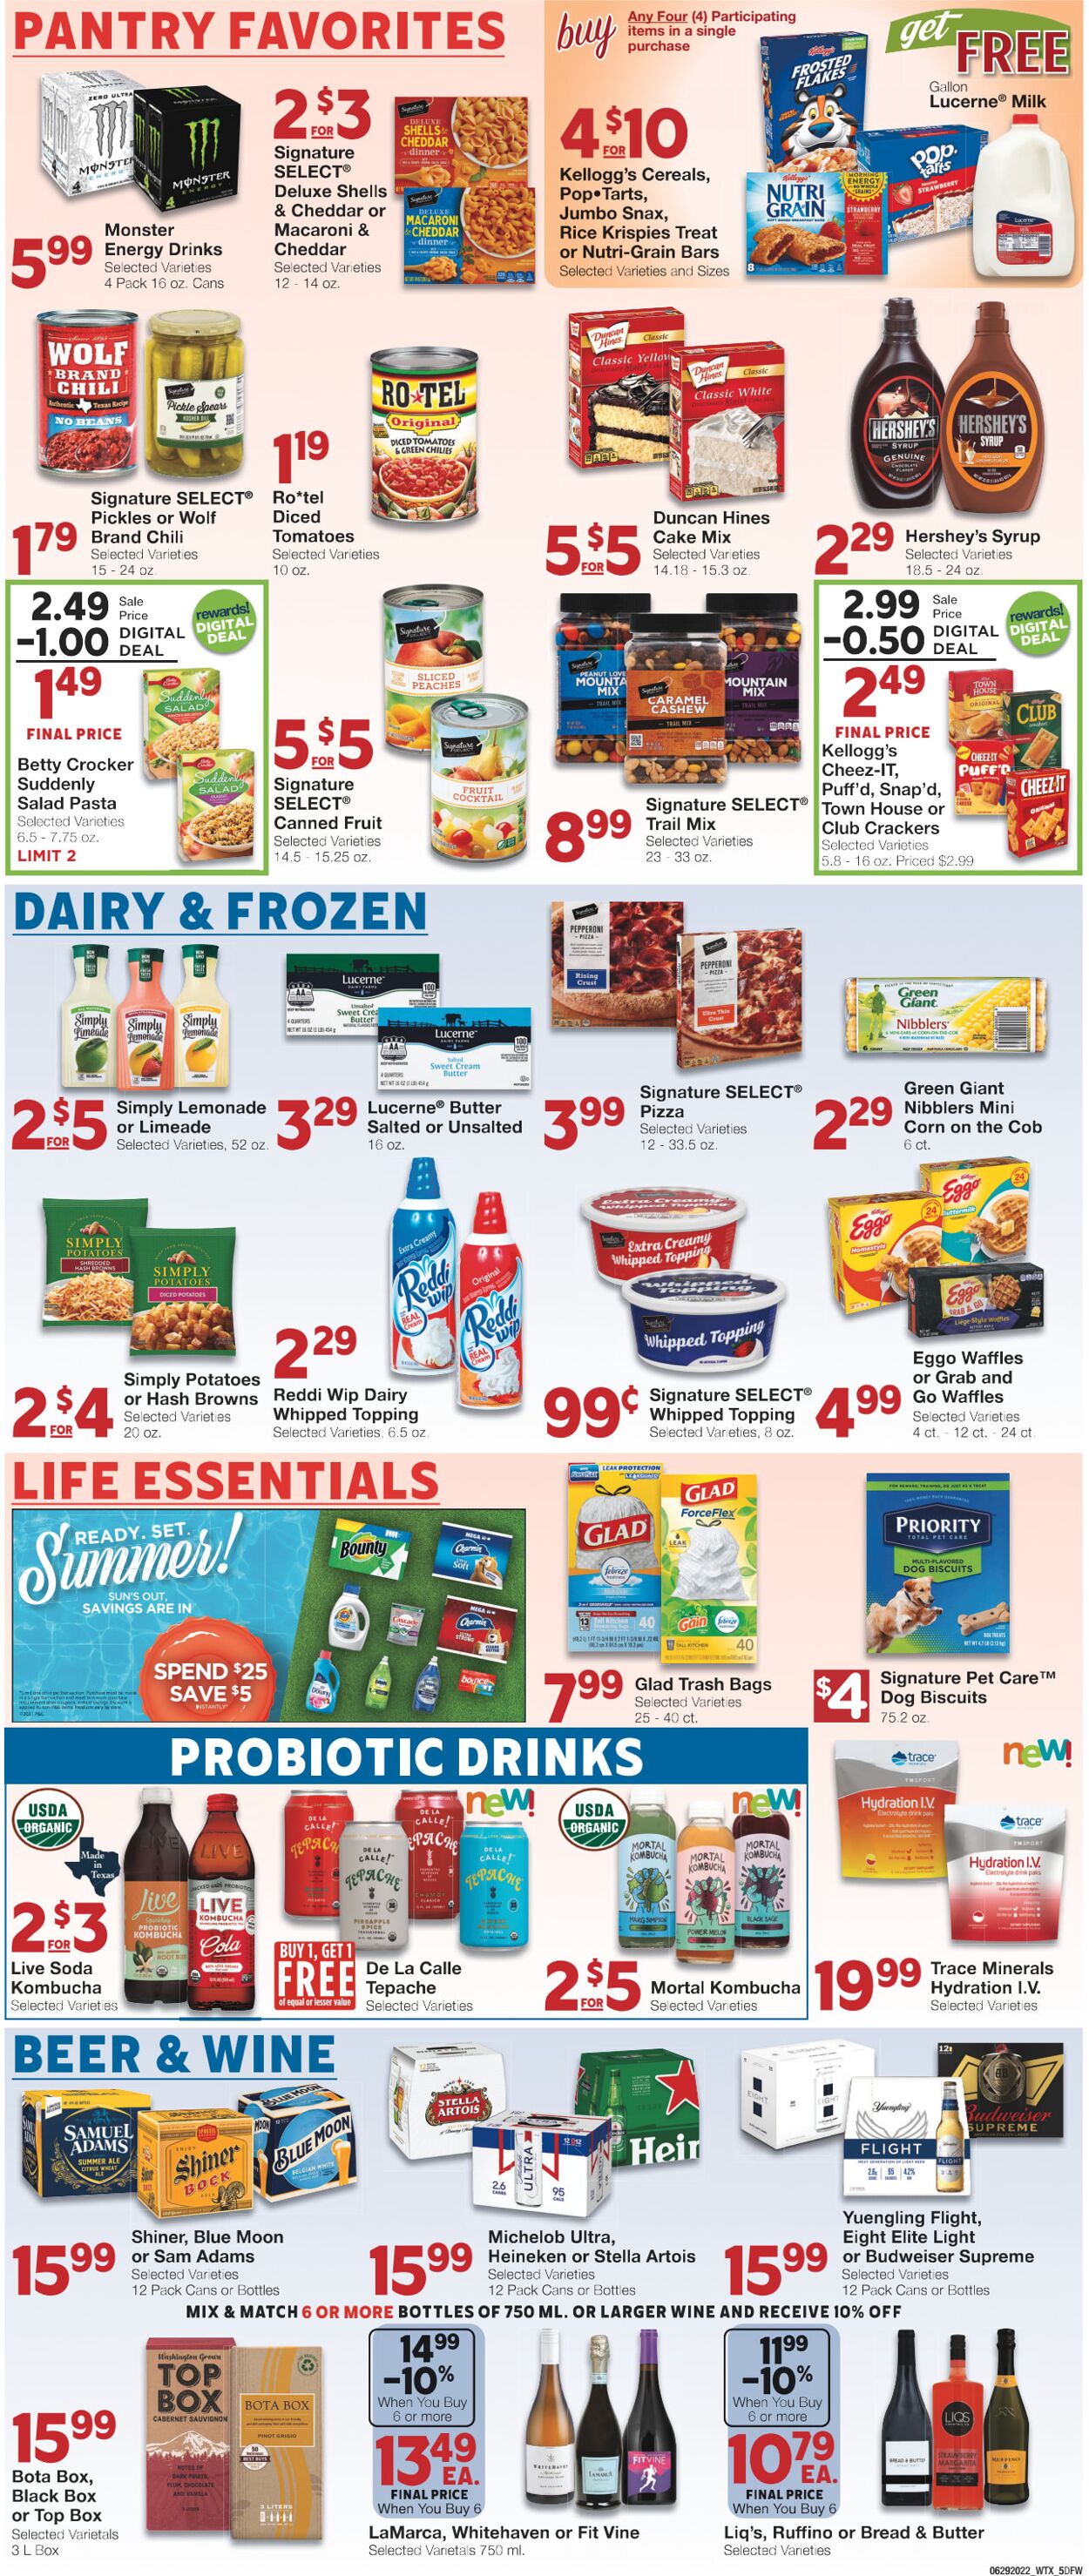 Weekly ad United Supermarkets 06/29/2022 - 07/05/2022